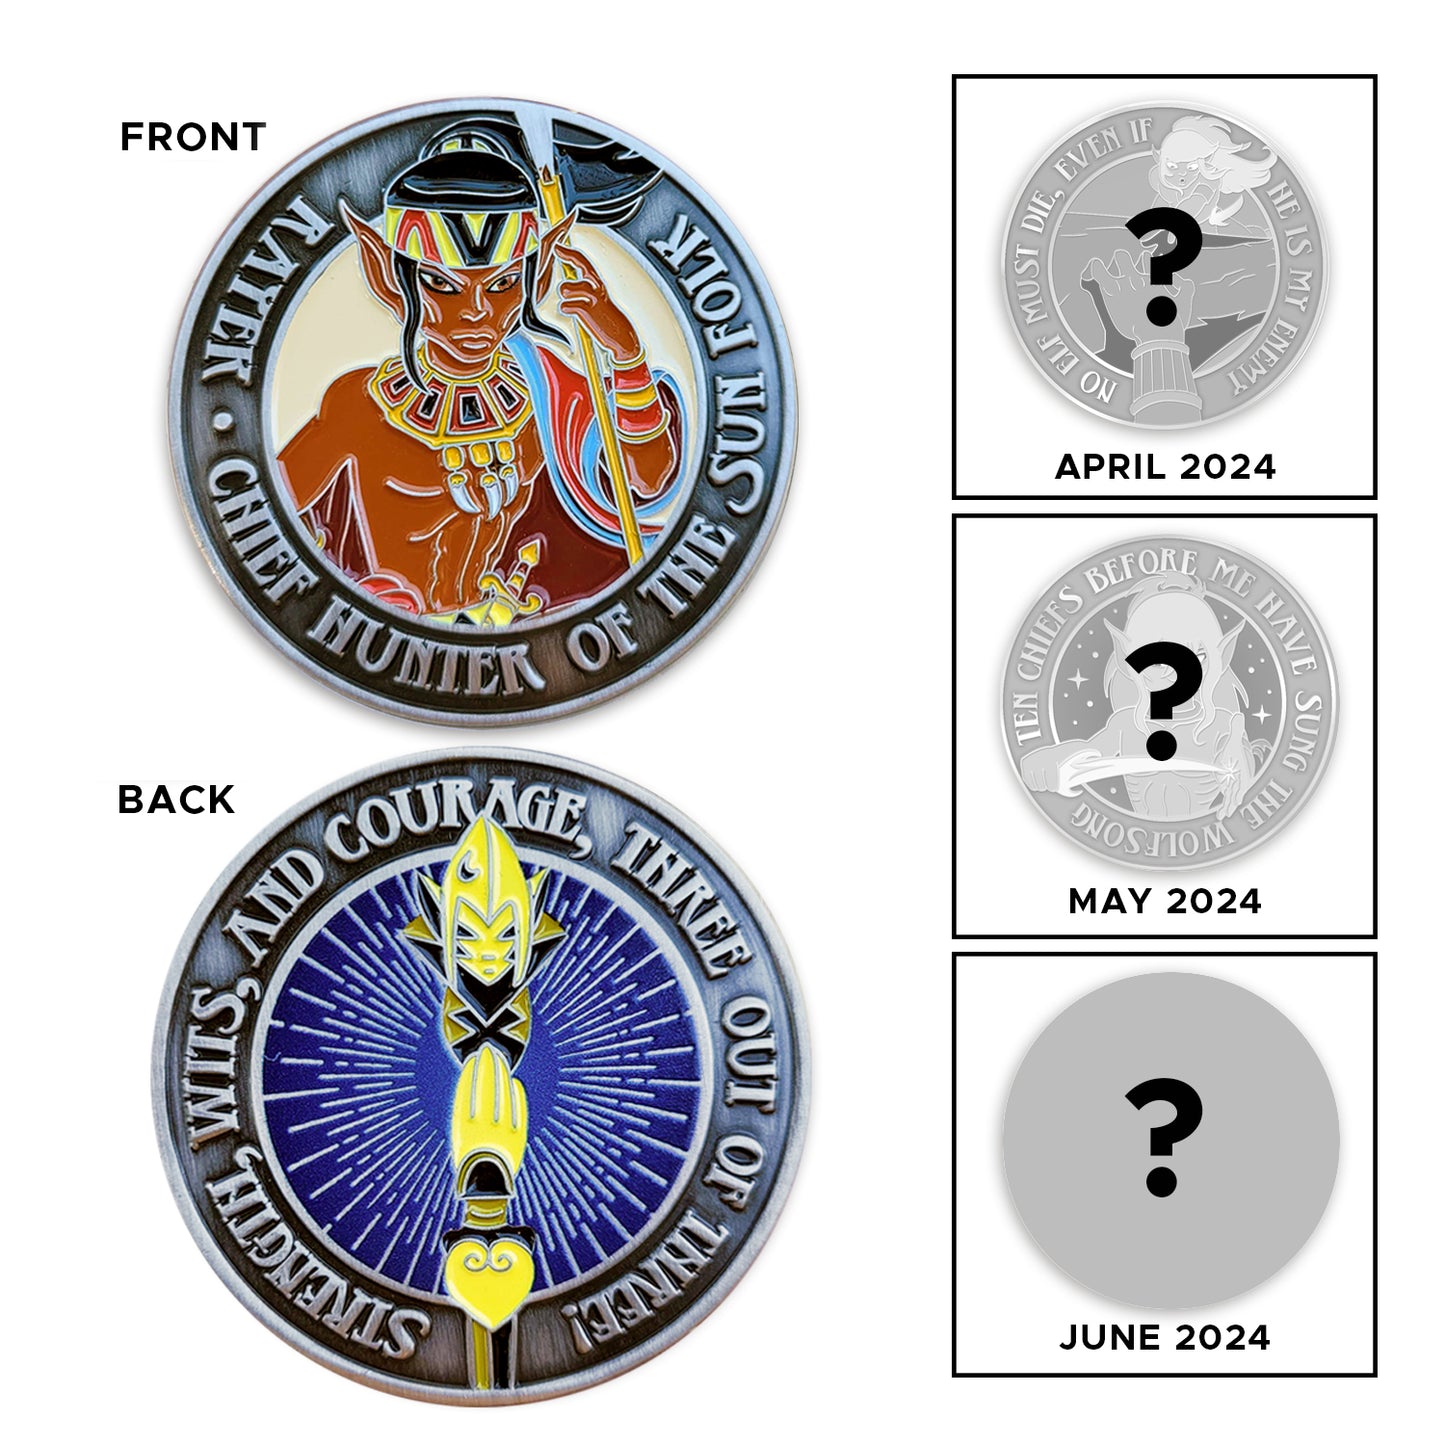 Front and back images of a brass challenge coin, on a wood table. The front depicts an elf with a yellow headband, wearing a collar. The elf is carrying a spear, and a red & blue robe is draped over his arm. Raised text around the edge reads "Rayek, chief hunter of the sun folk." The back shows a yellow spear tip on a blue background. Raised text around the egde reads "Strength, wits, and courage, three out of three!" On the right are gray coins, teasing upcoming challenge coins